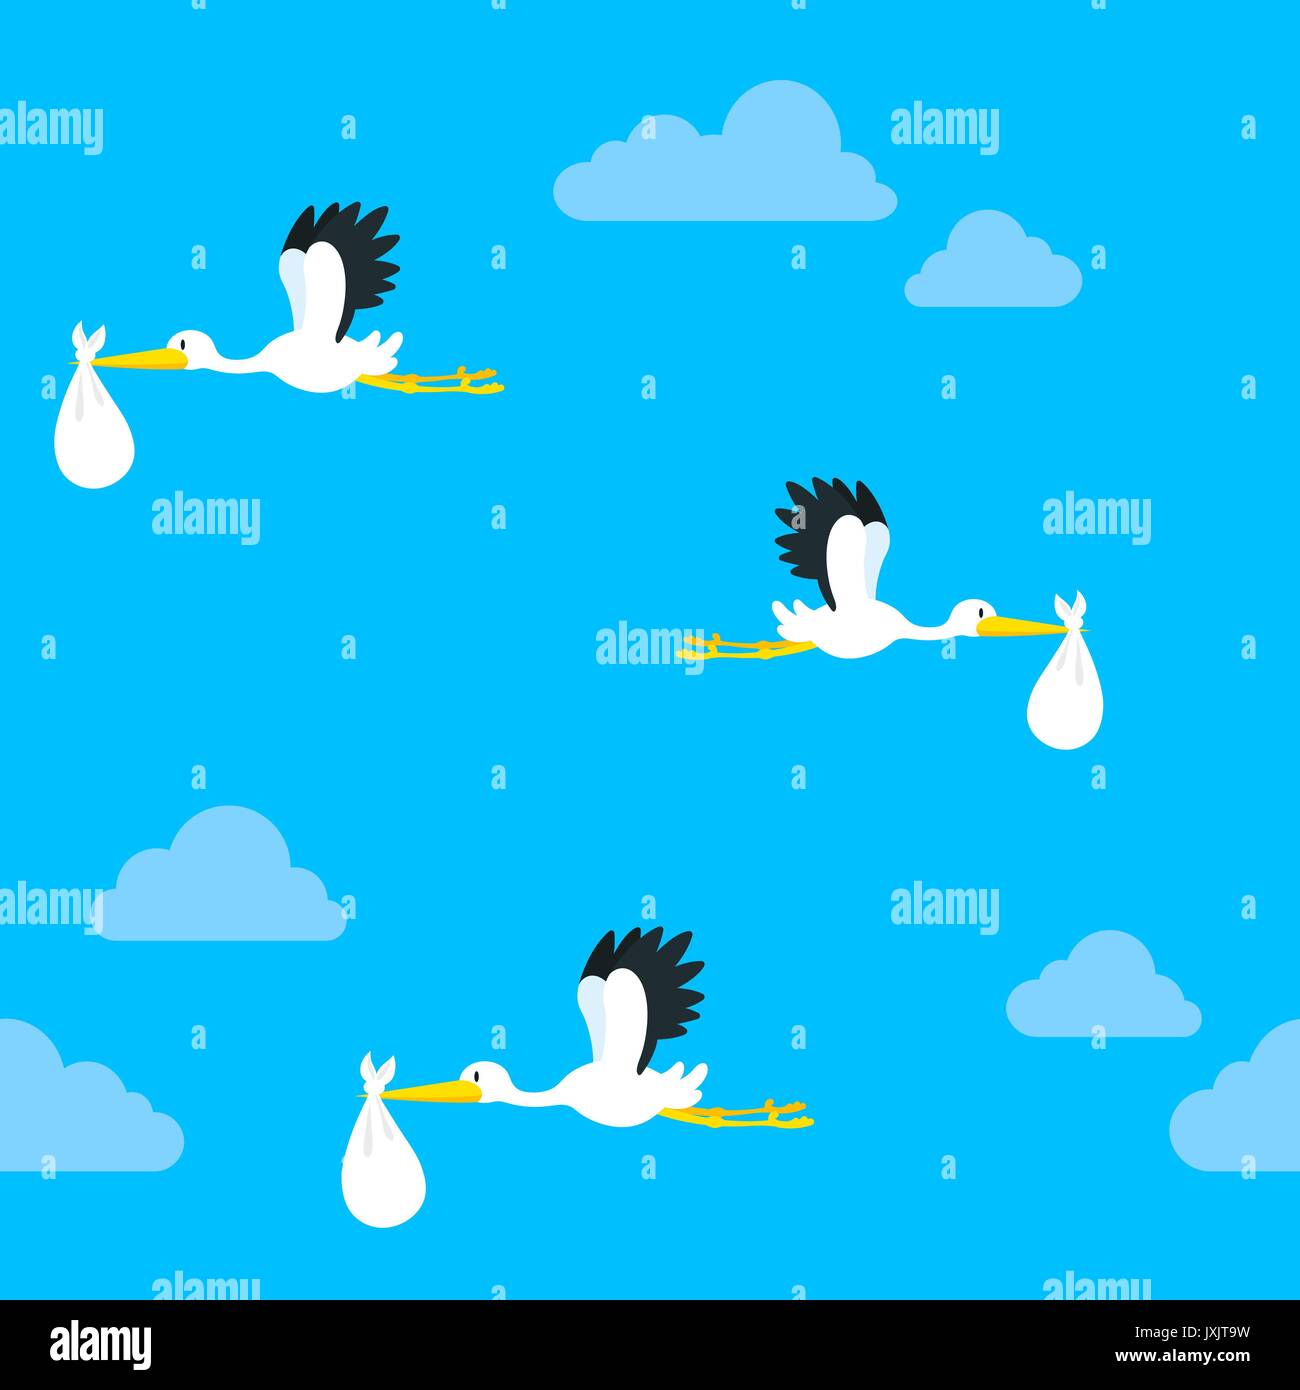 Seamless pattern of flying storks carrying a baby in a white bundle in their beaks against a blue cloudy sky, square format vector illustration Stock Vector